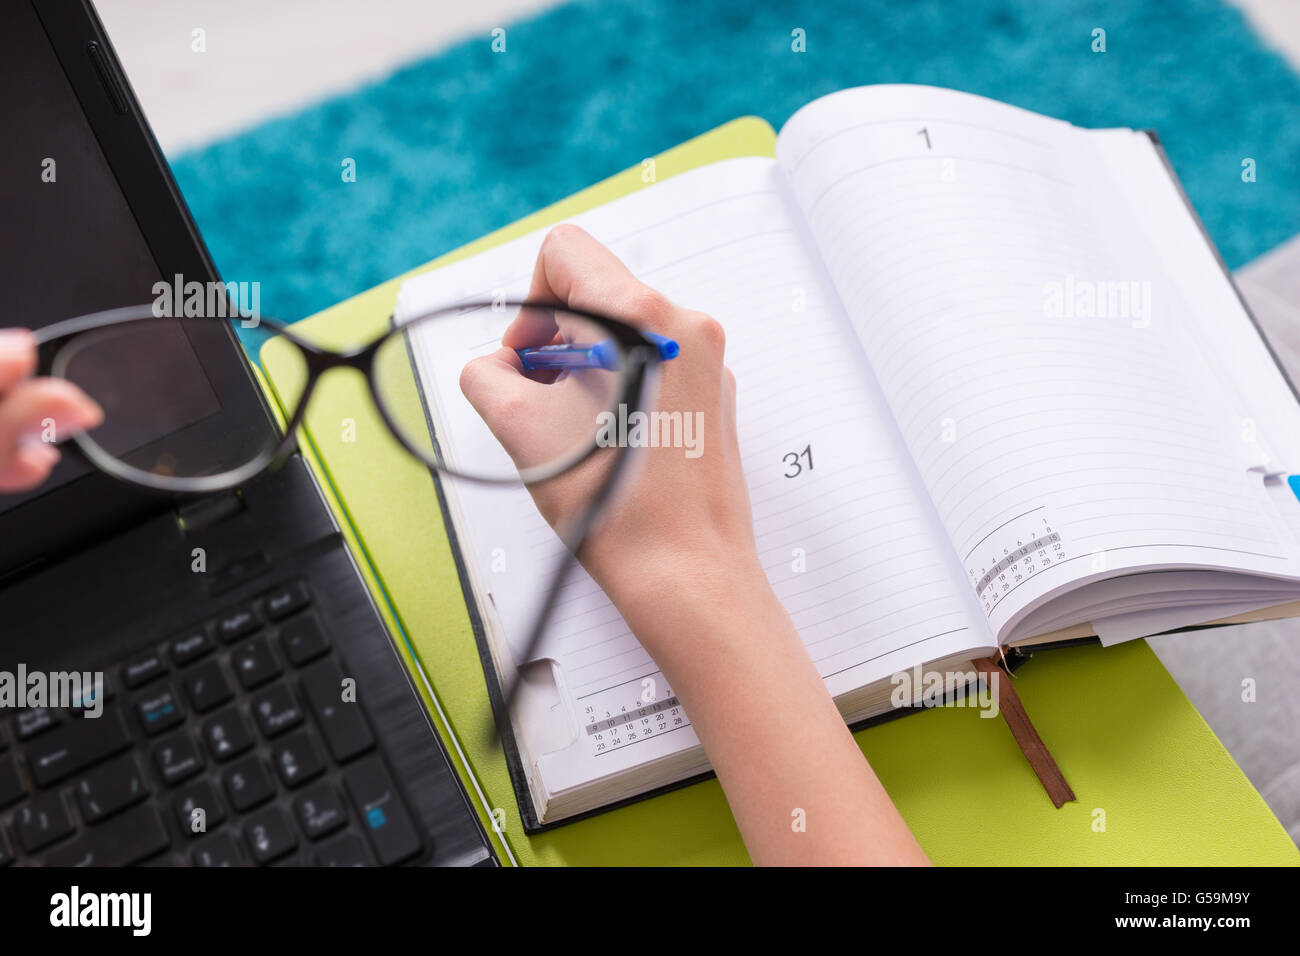 Close up view through glasses to the open blank page of a business journal or diary with a focus on woman's hand, who holding a Stock Photo